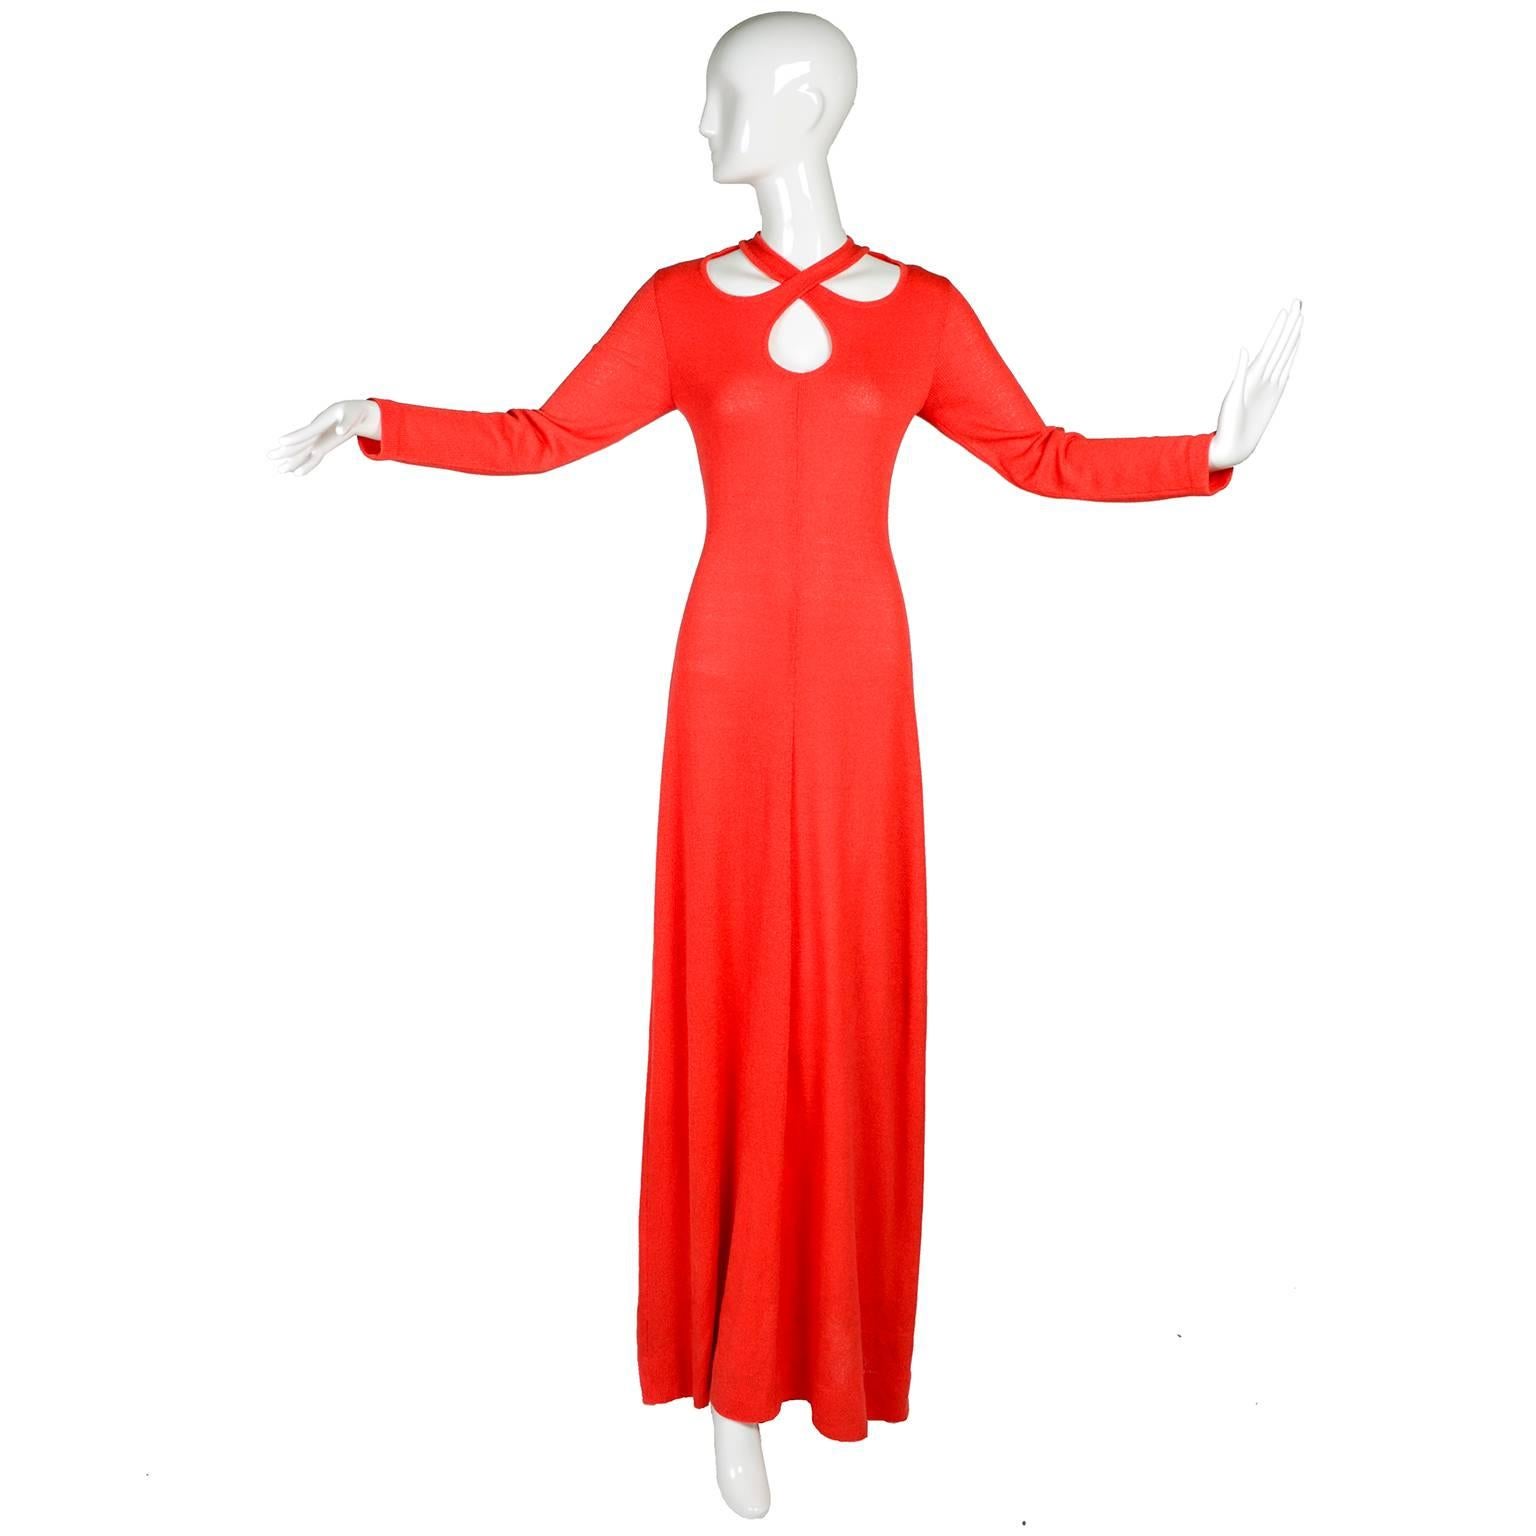 This is a wonderful 1970's Arbe Imports orange red stretch knit maxi dress with a criss crossing bodice leaving large keyhole cutouts. This long sleeve dress zips up the back. Made in Italy. Marked as a size 12, and measures like a modern US size